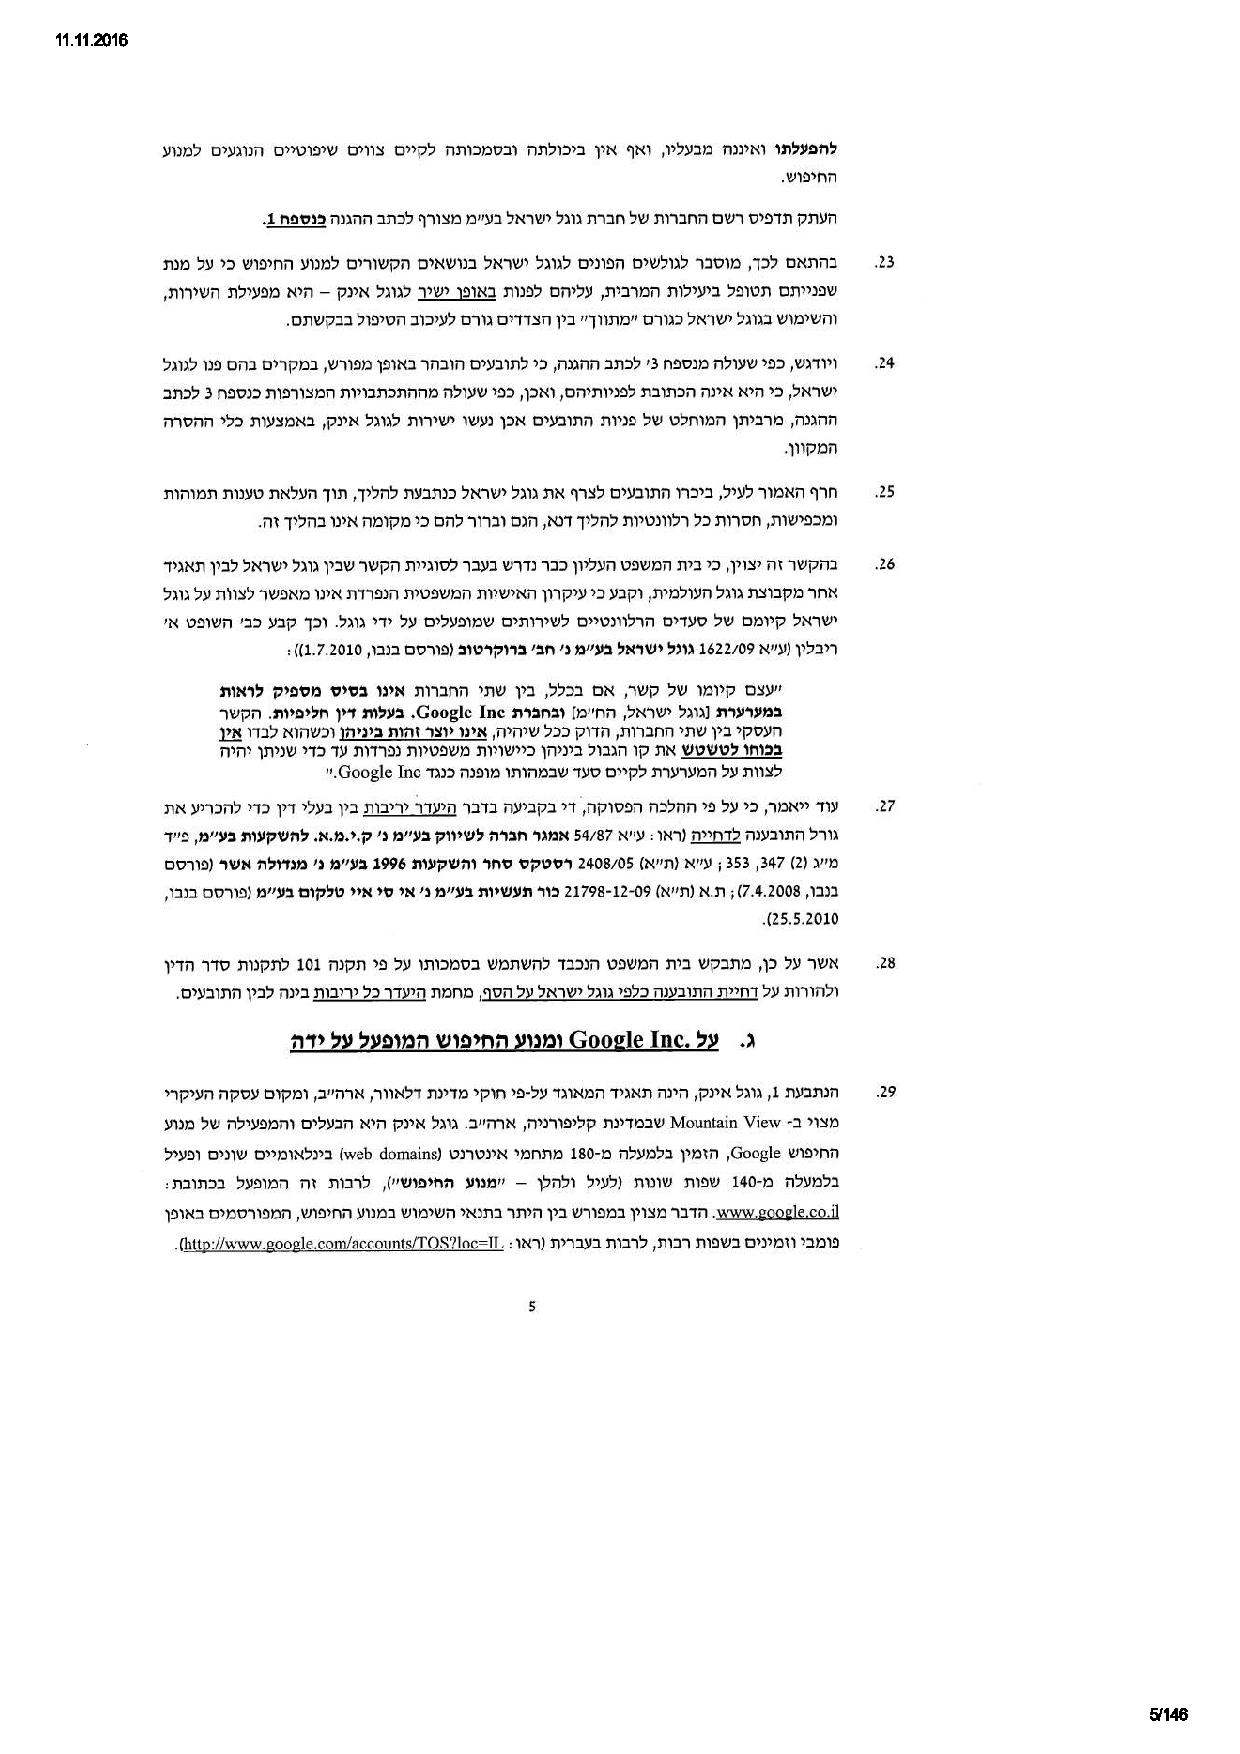 document-page-005